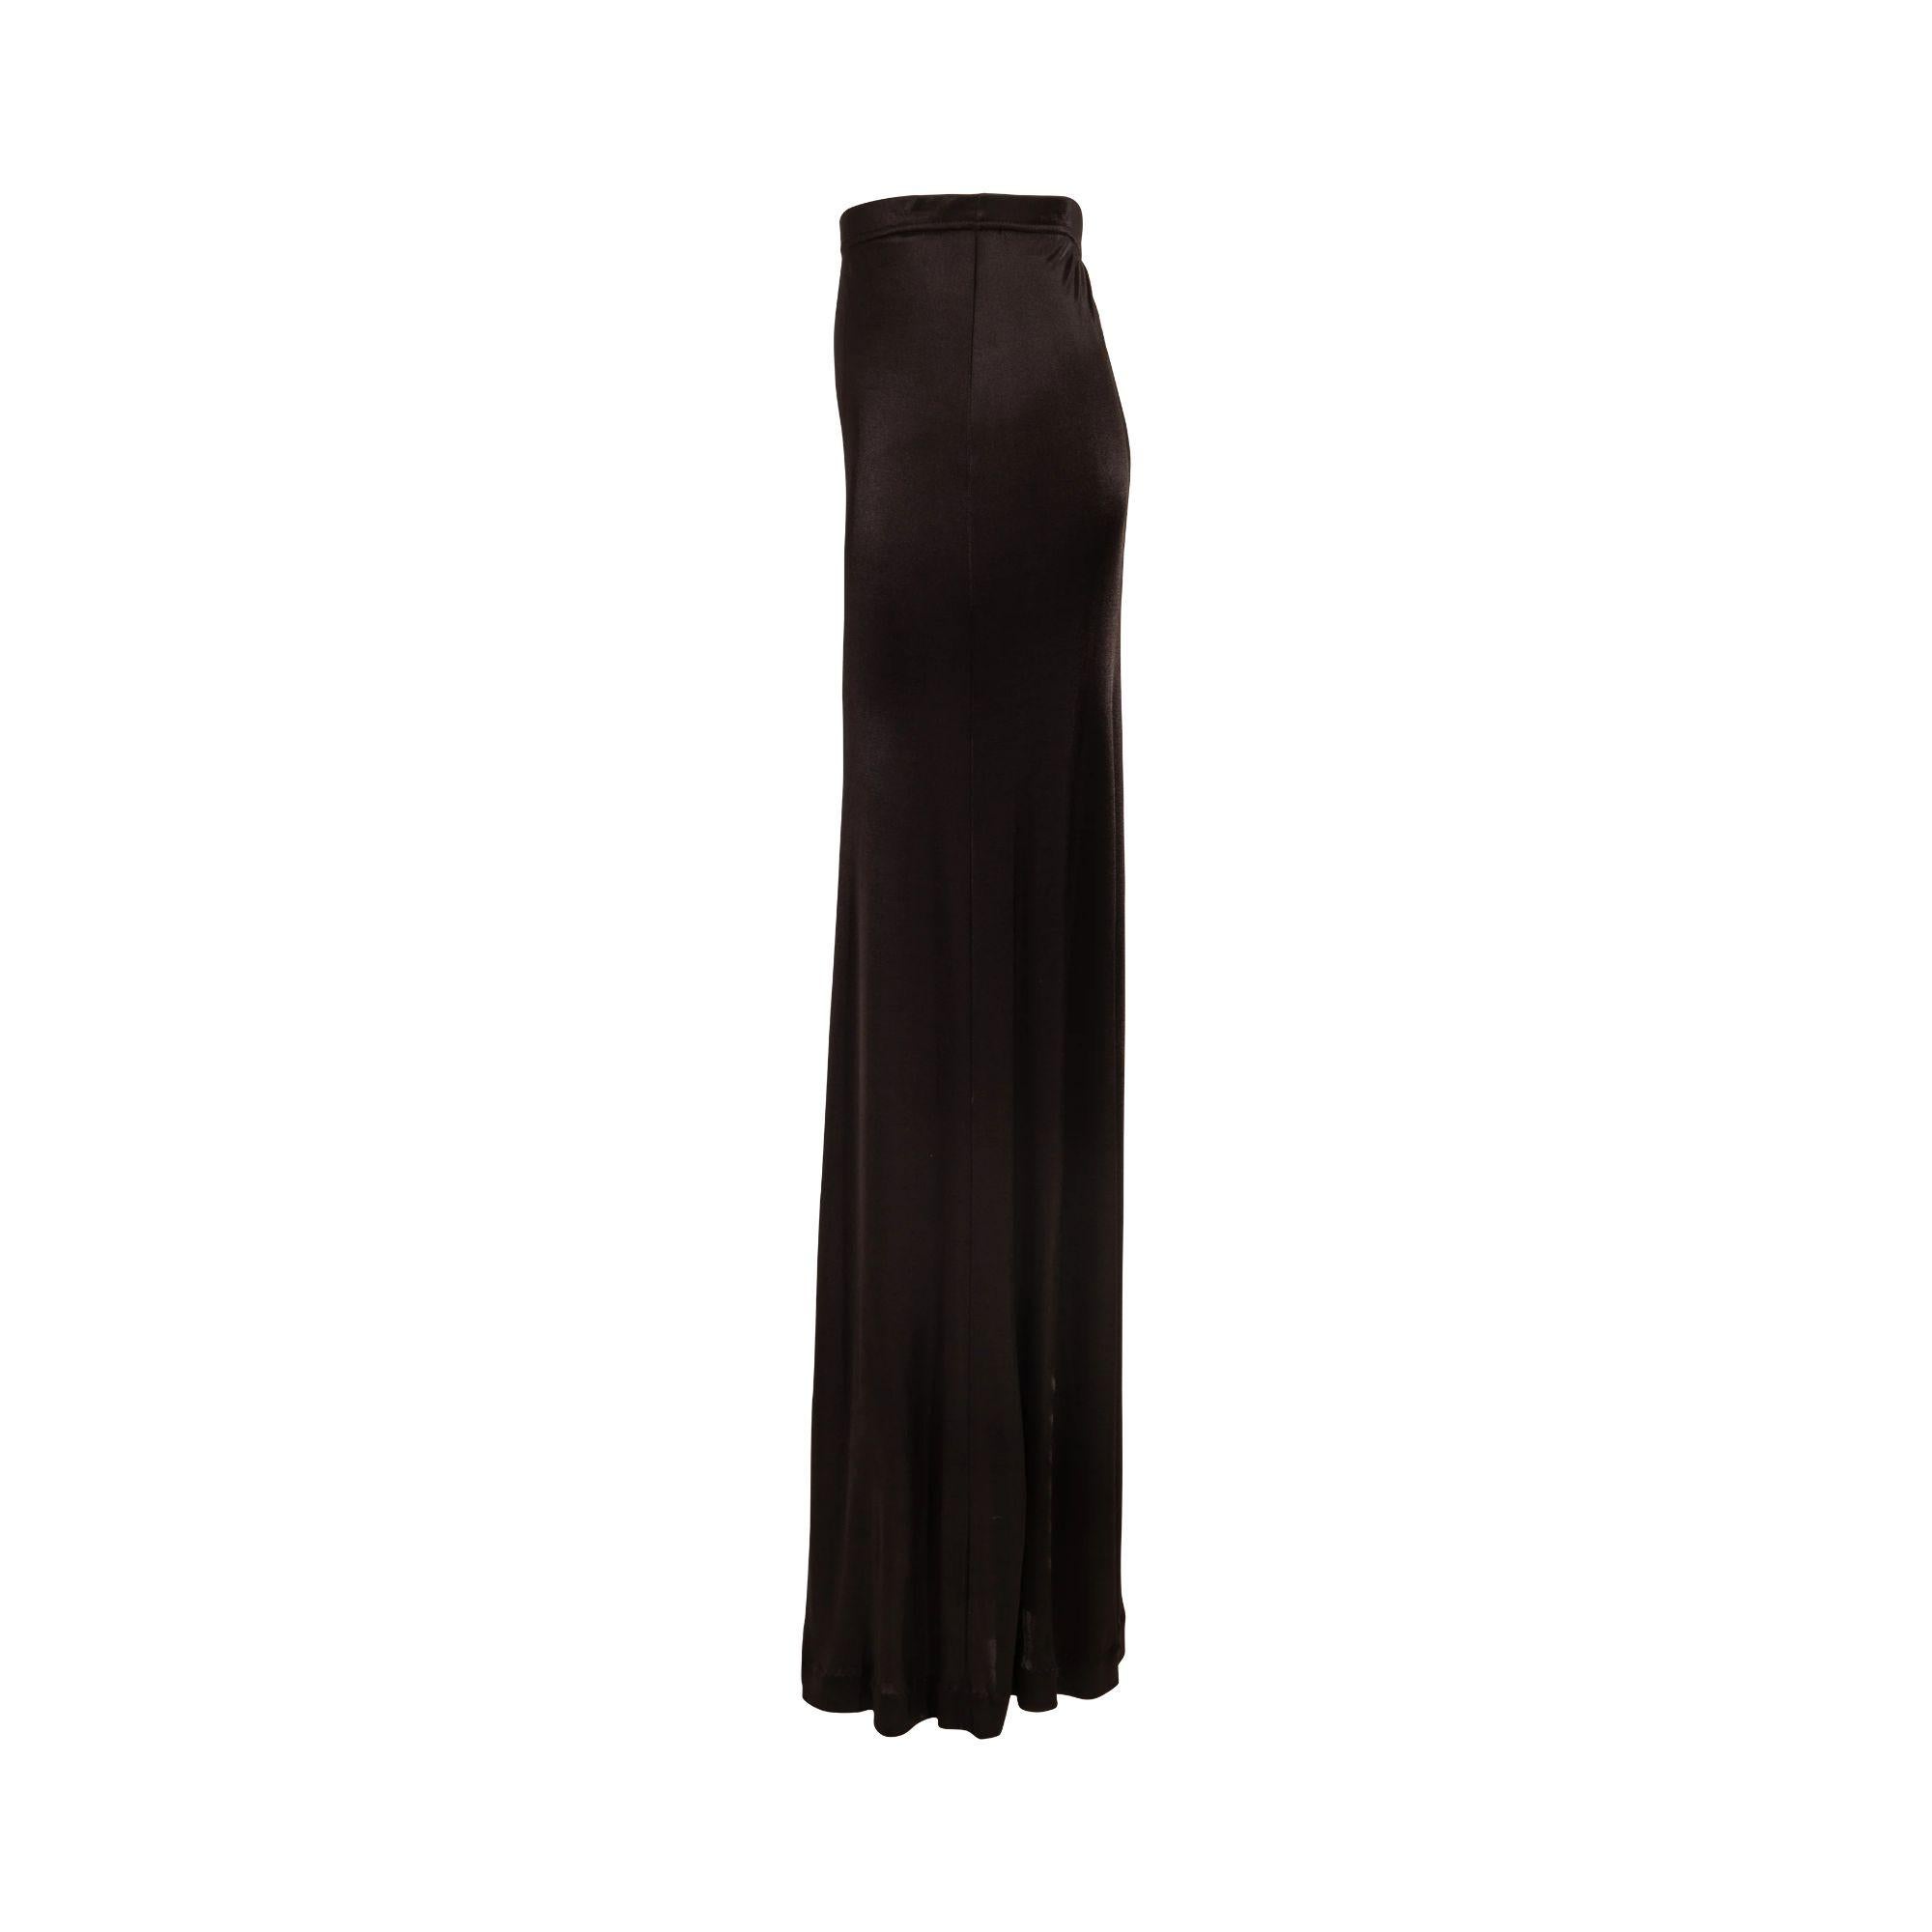 1990's Maison Margiela deep brown (nearly black) jersey skirt. A-line skirt with moderate stretch throughout. 100% Rayon. In very good vintage condition with light wear throughout. Stretch allows for wide range of sizing, with slight 'cowl' effect